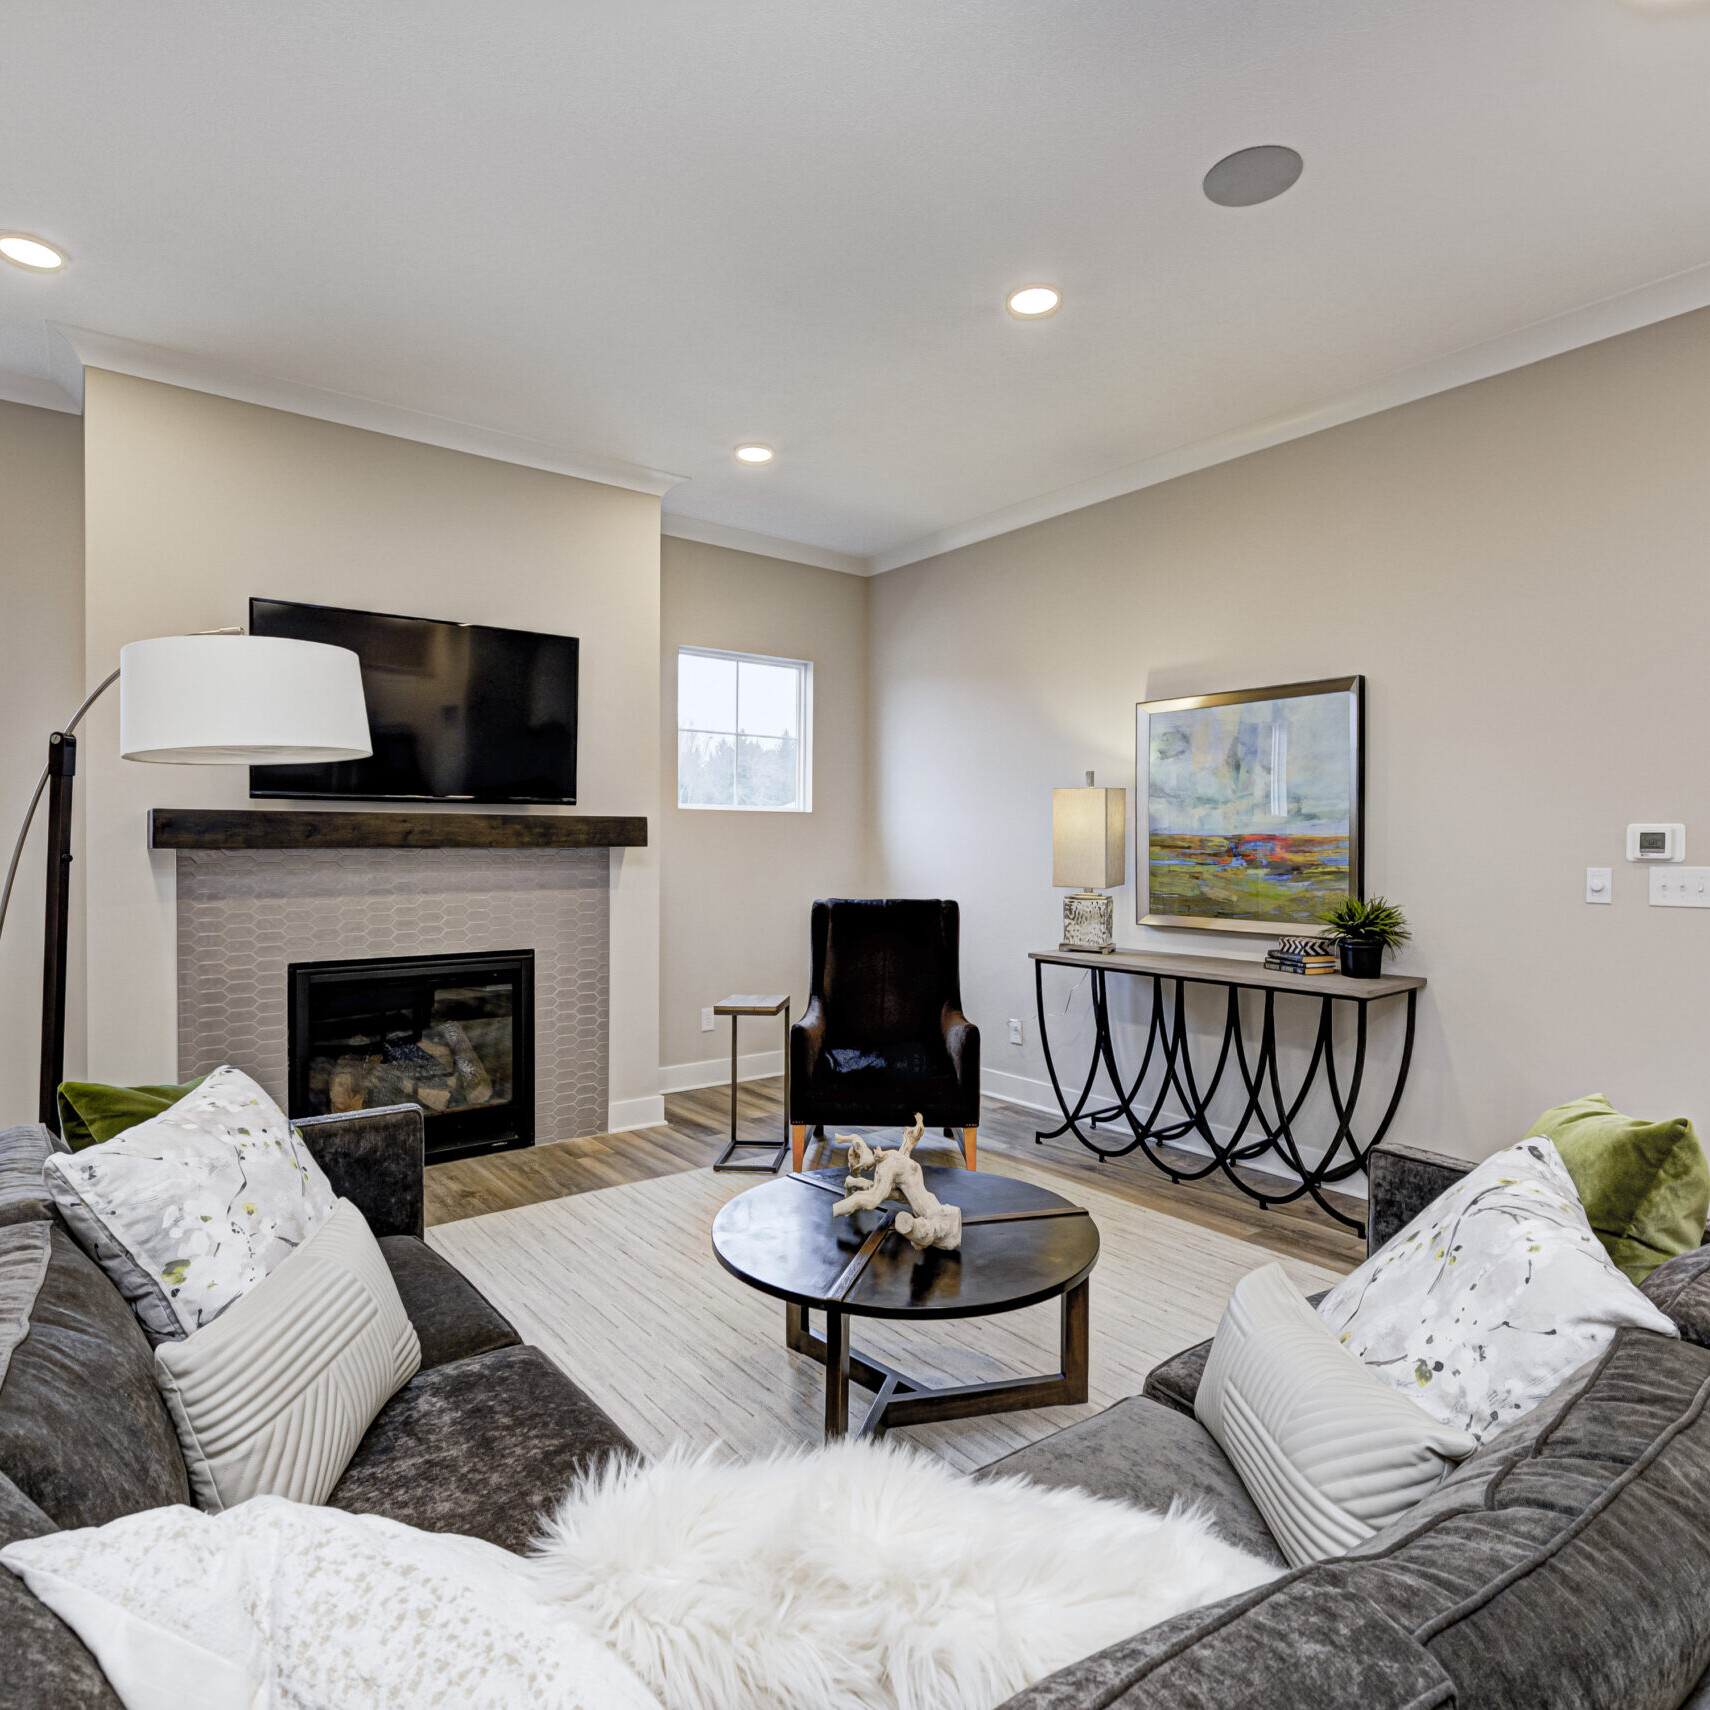 A custom-built living room in Fishers, Indiana with cozy couches and a warm fireplace.